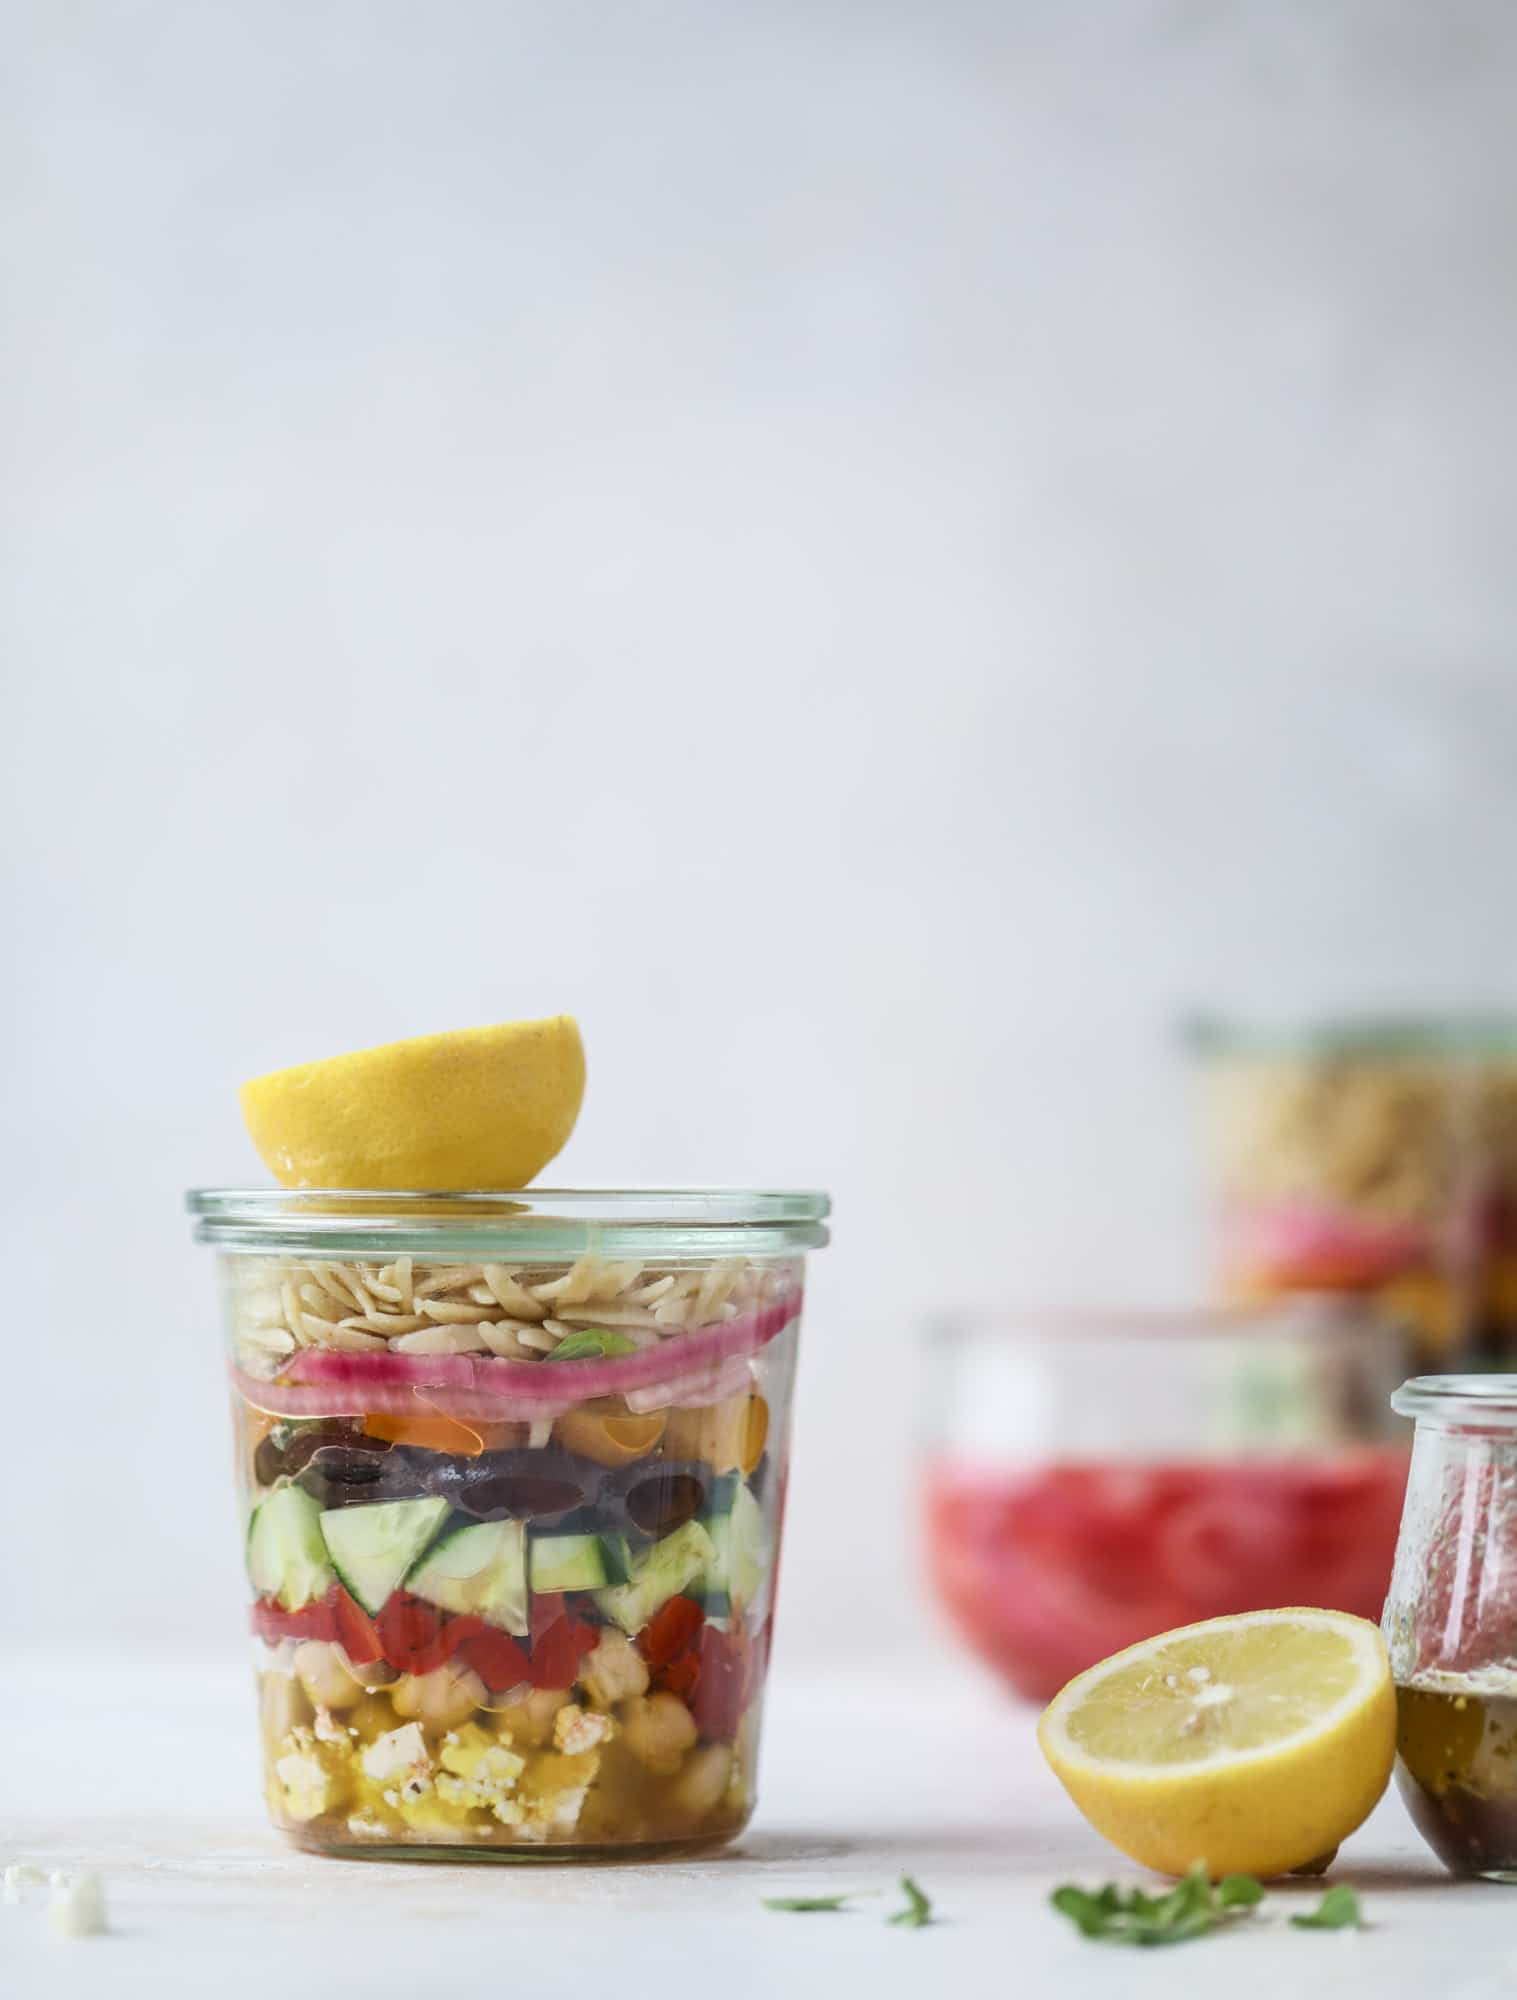 This incredible greek orzo salad in a jar is to die for! The recipe is so easy and flavorful, super satisfying and perfect for meal prep. This salad in a jar is a delicious lunch idea for the weekdays and keeps you feeling full and happy! I howsweeteats.com #salad #jar #greek #orzo #recipes #healthy #lunch #mealprep